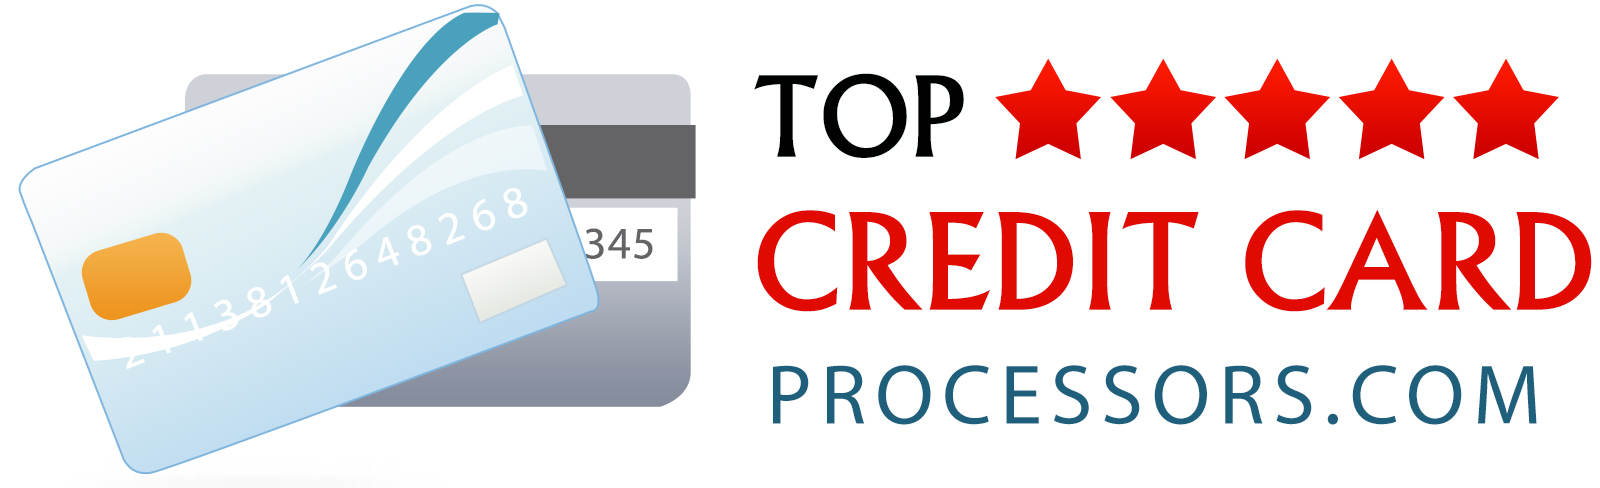 Biz2Credit Named Best Small Business Loans Company by topcreditcardprocessors.com for September 2021